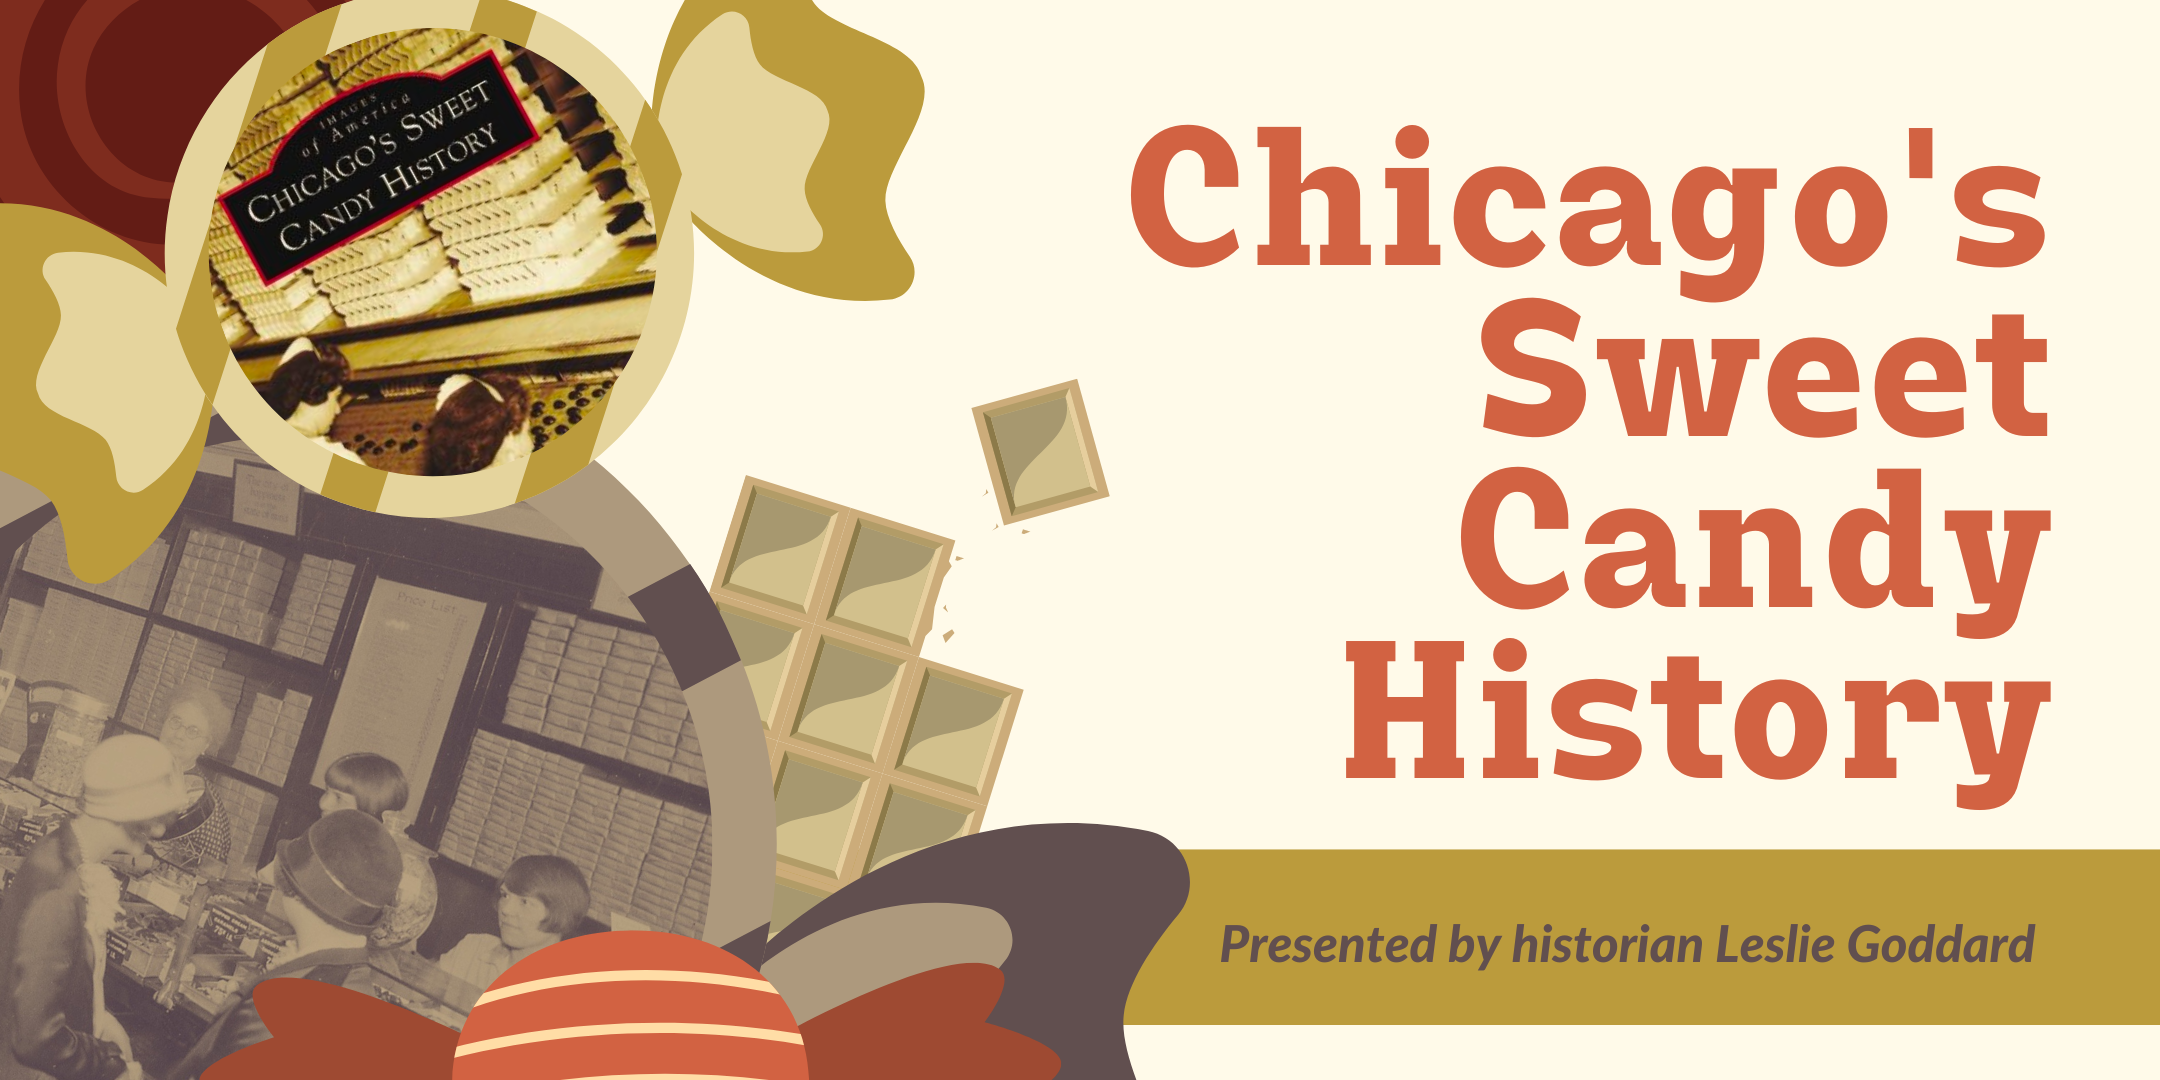 image of "Chicago's Sweet Candy History"